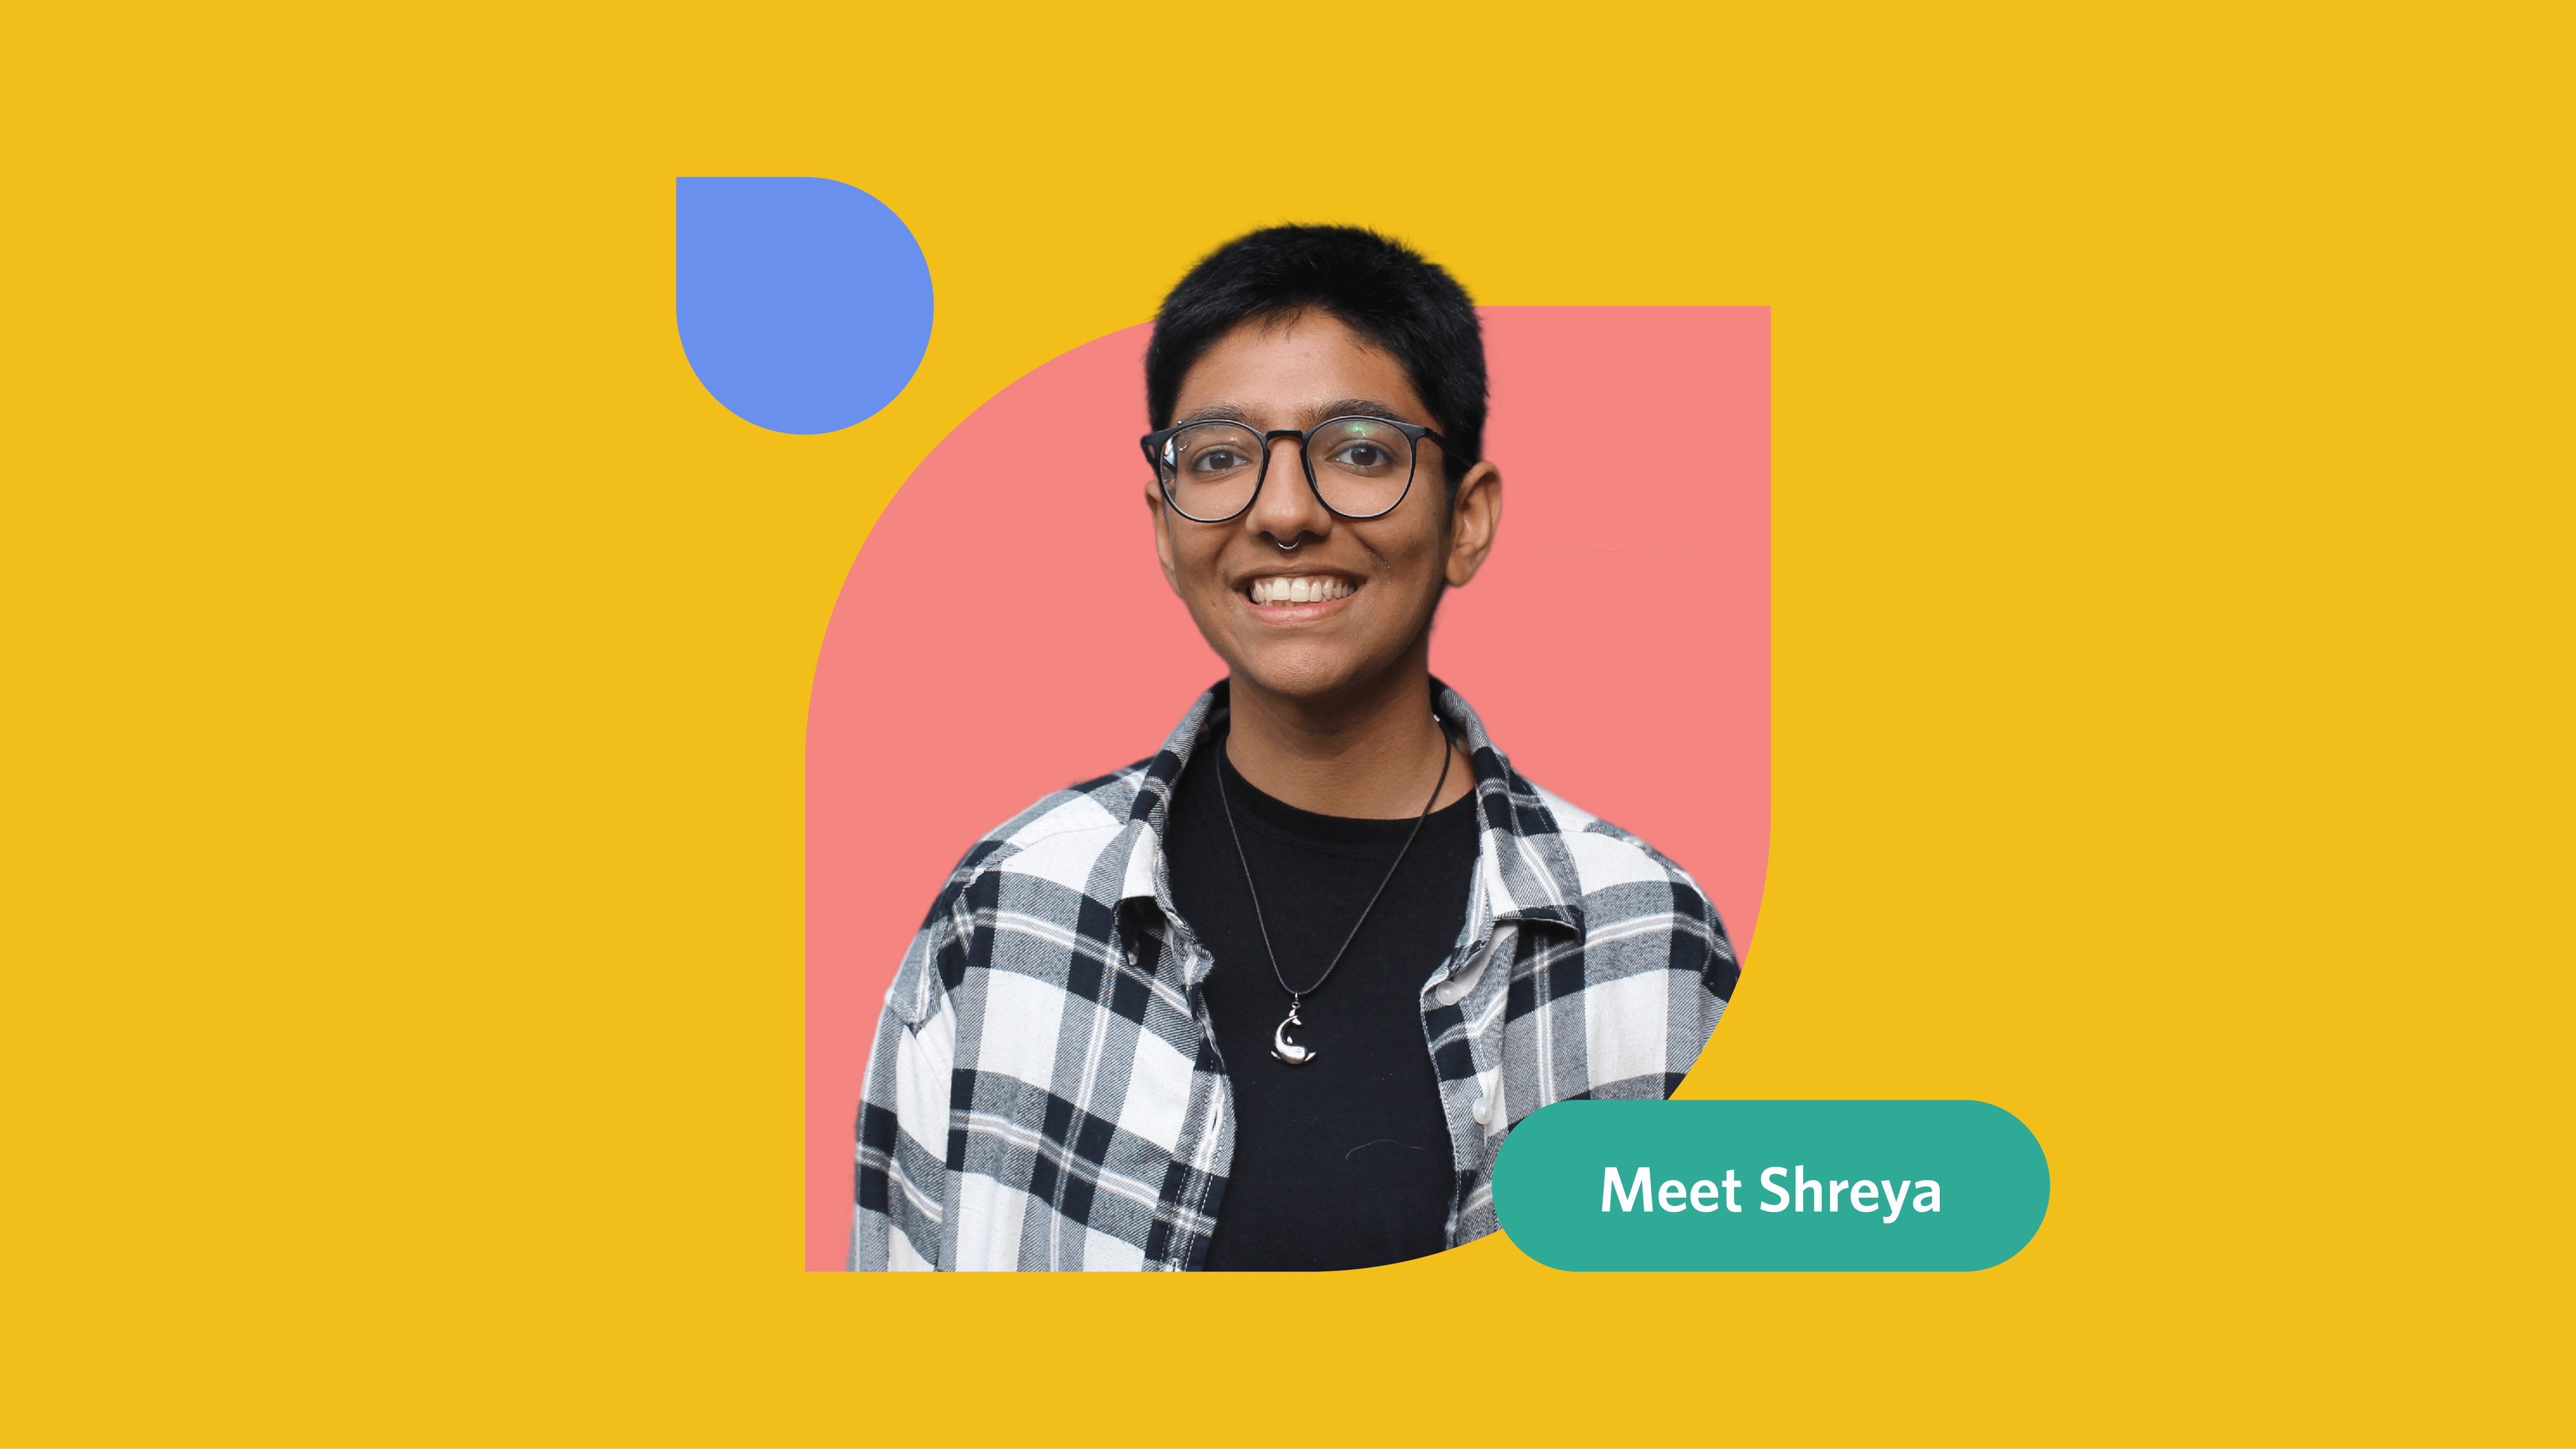 Yellow, pink, and blue graphic with a photo of Shreya Diwan with the text "Meet Shreya"